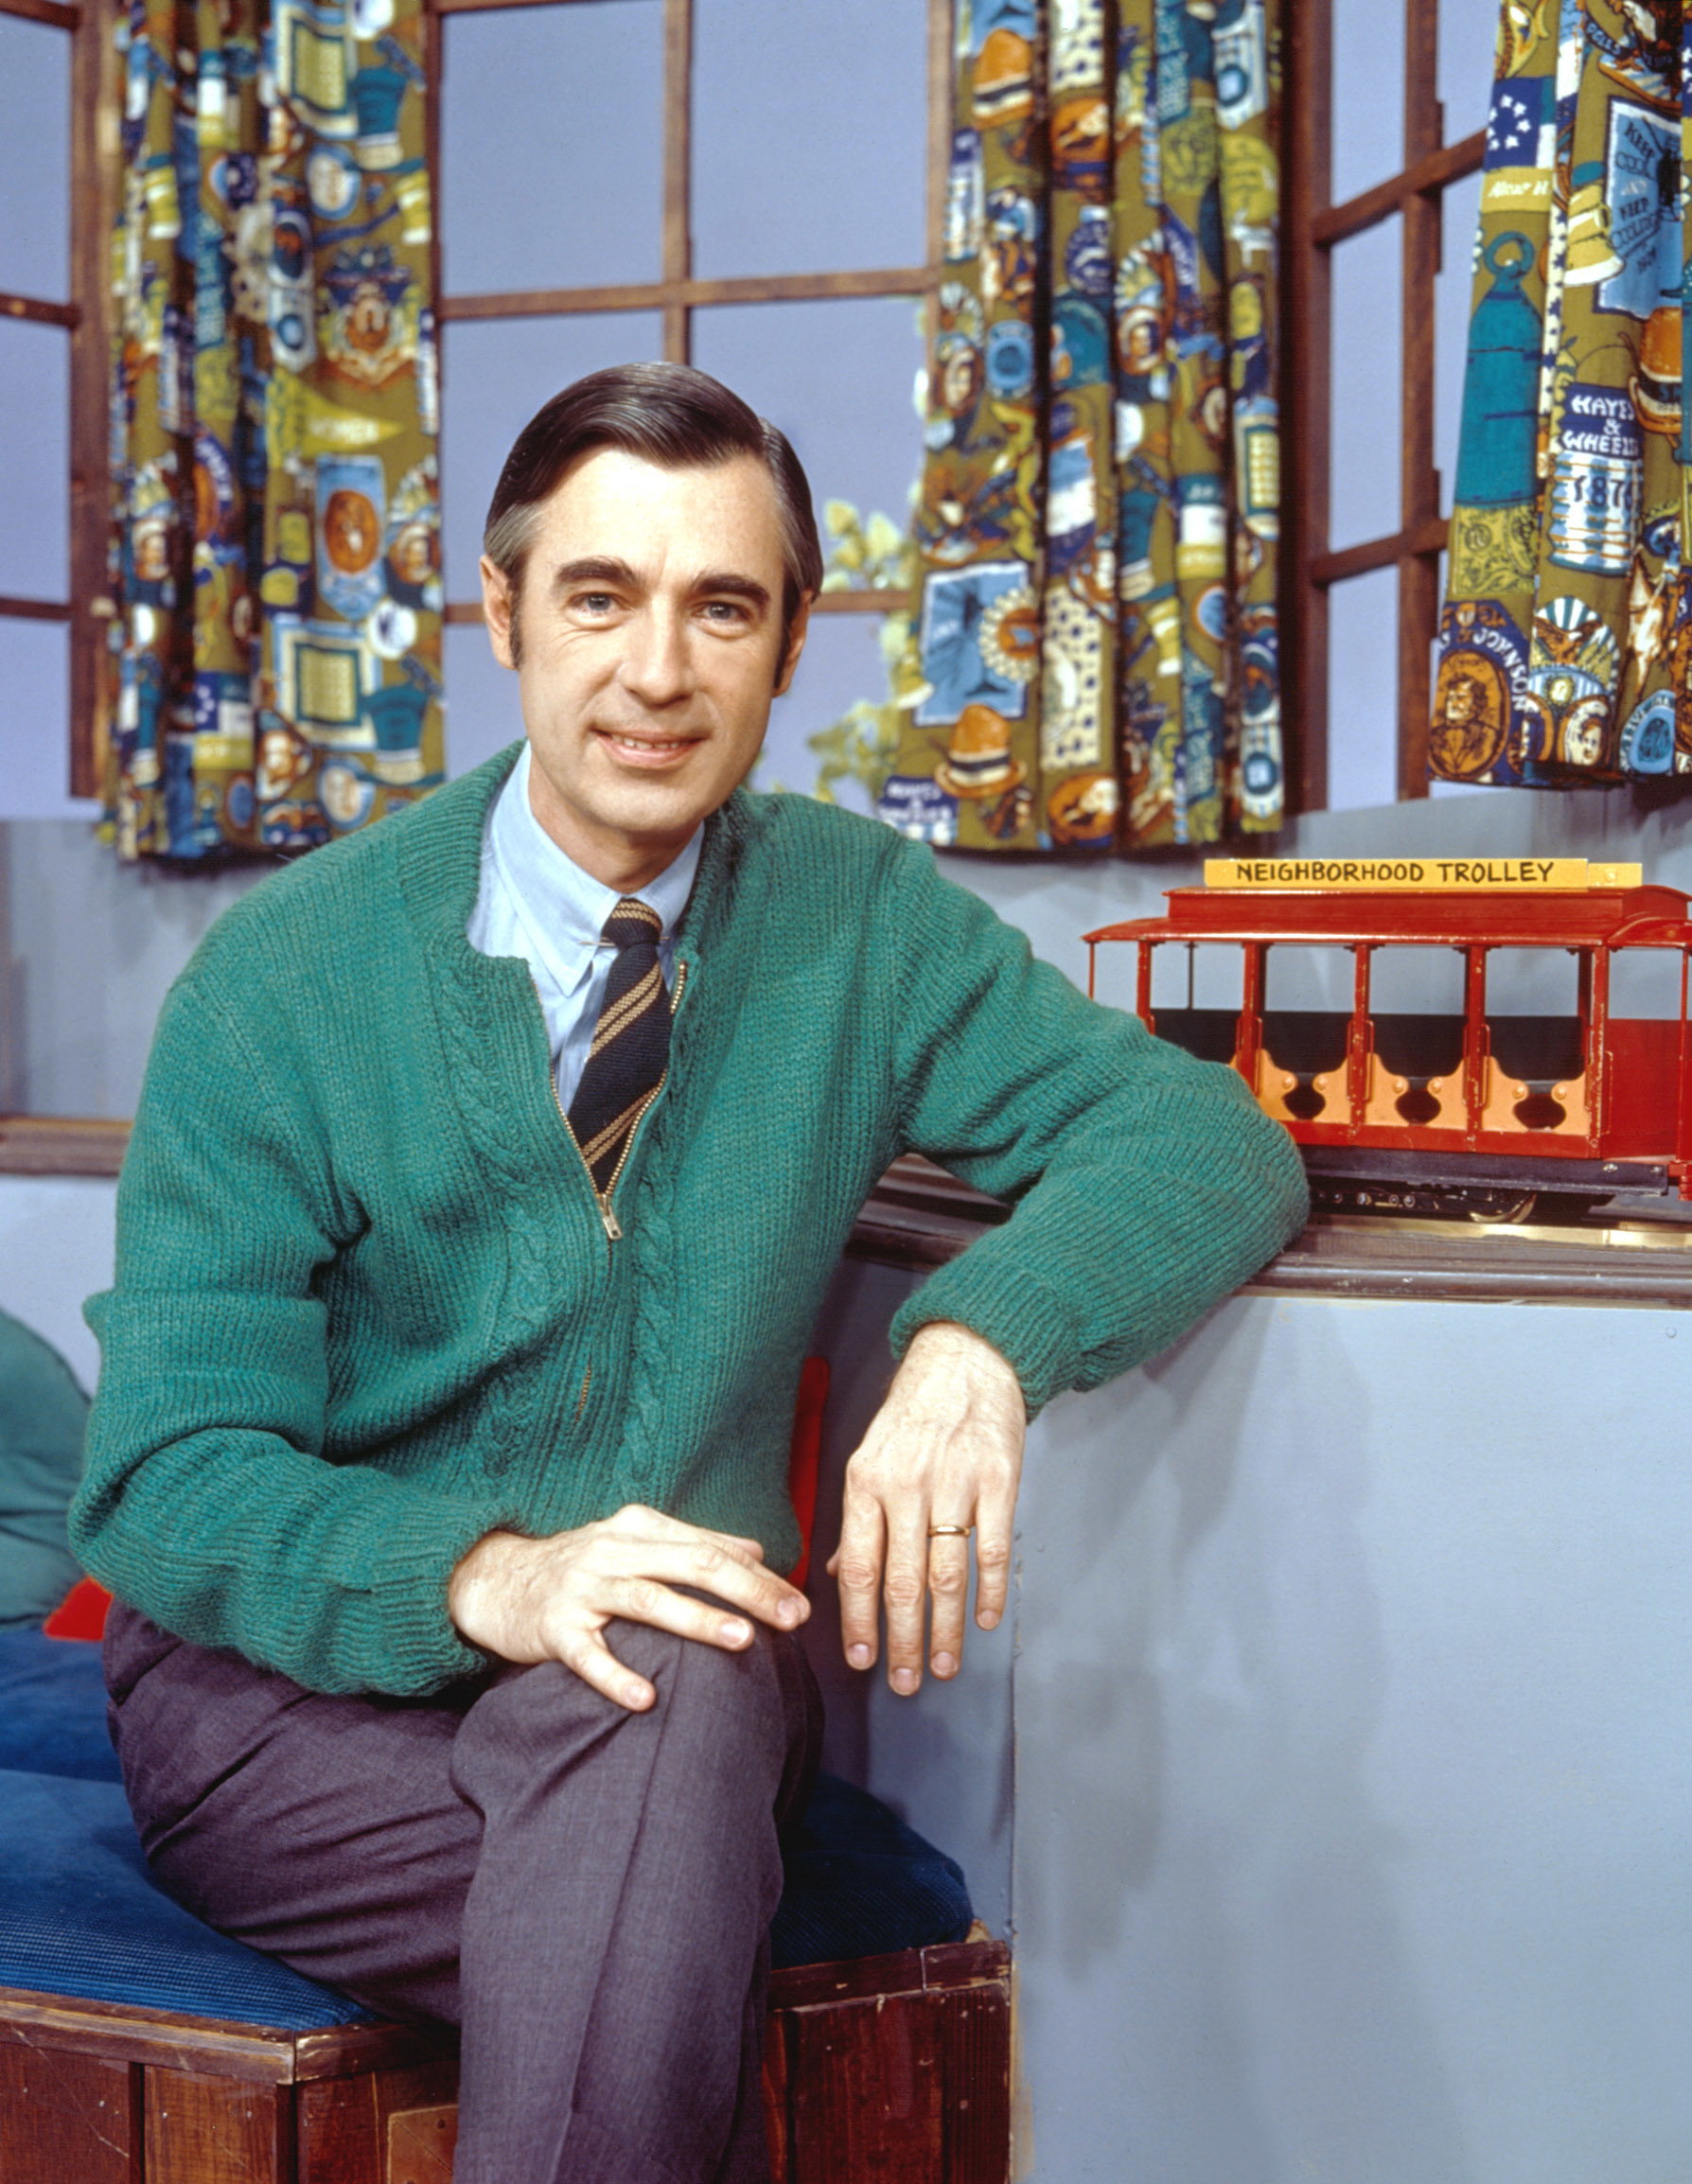 Fred Rogers in a green cardigan sits with a trolley model from his show